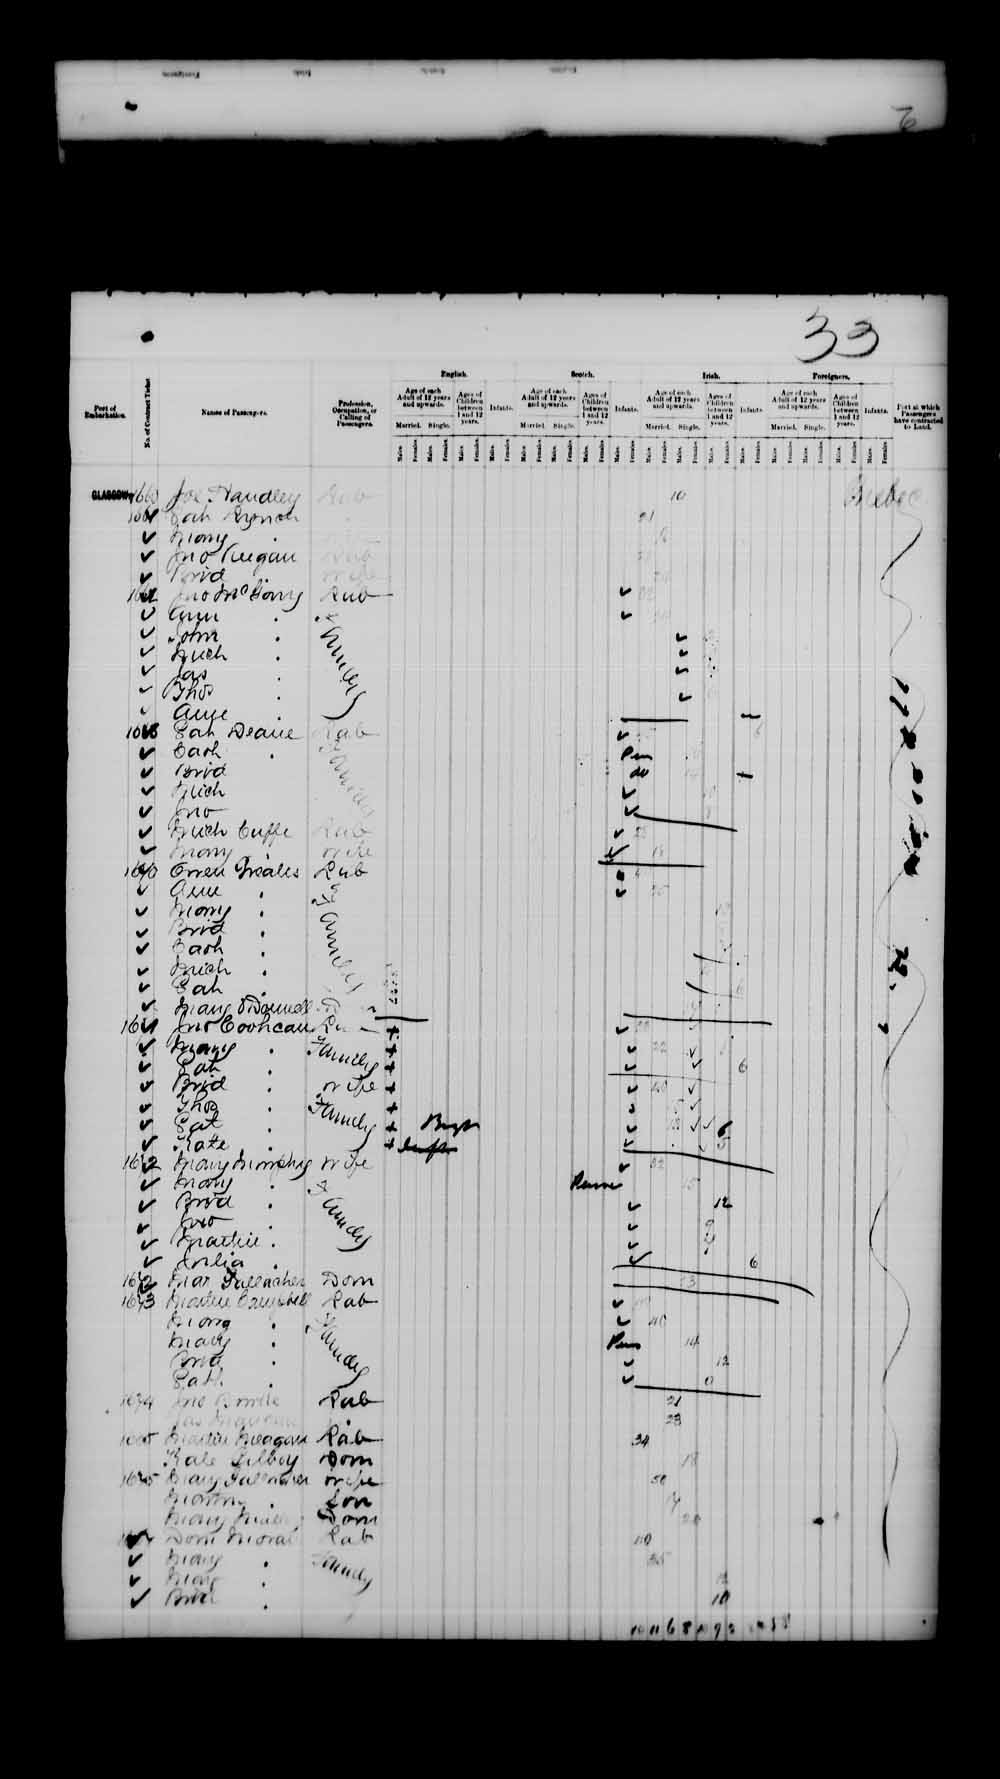 Digitized page of Passenger Lists for Image No.: e003543108